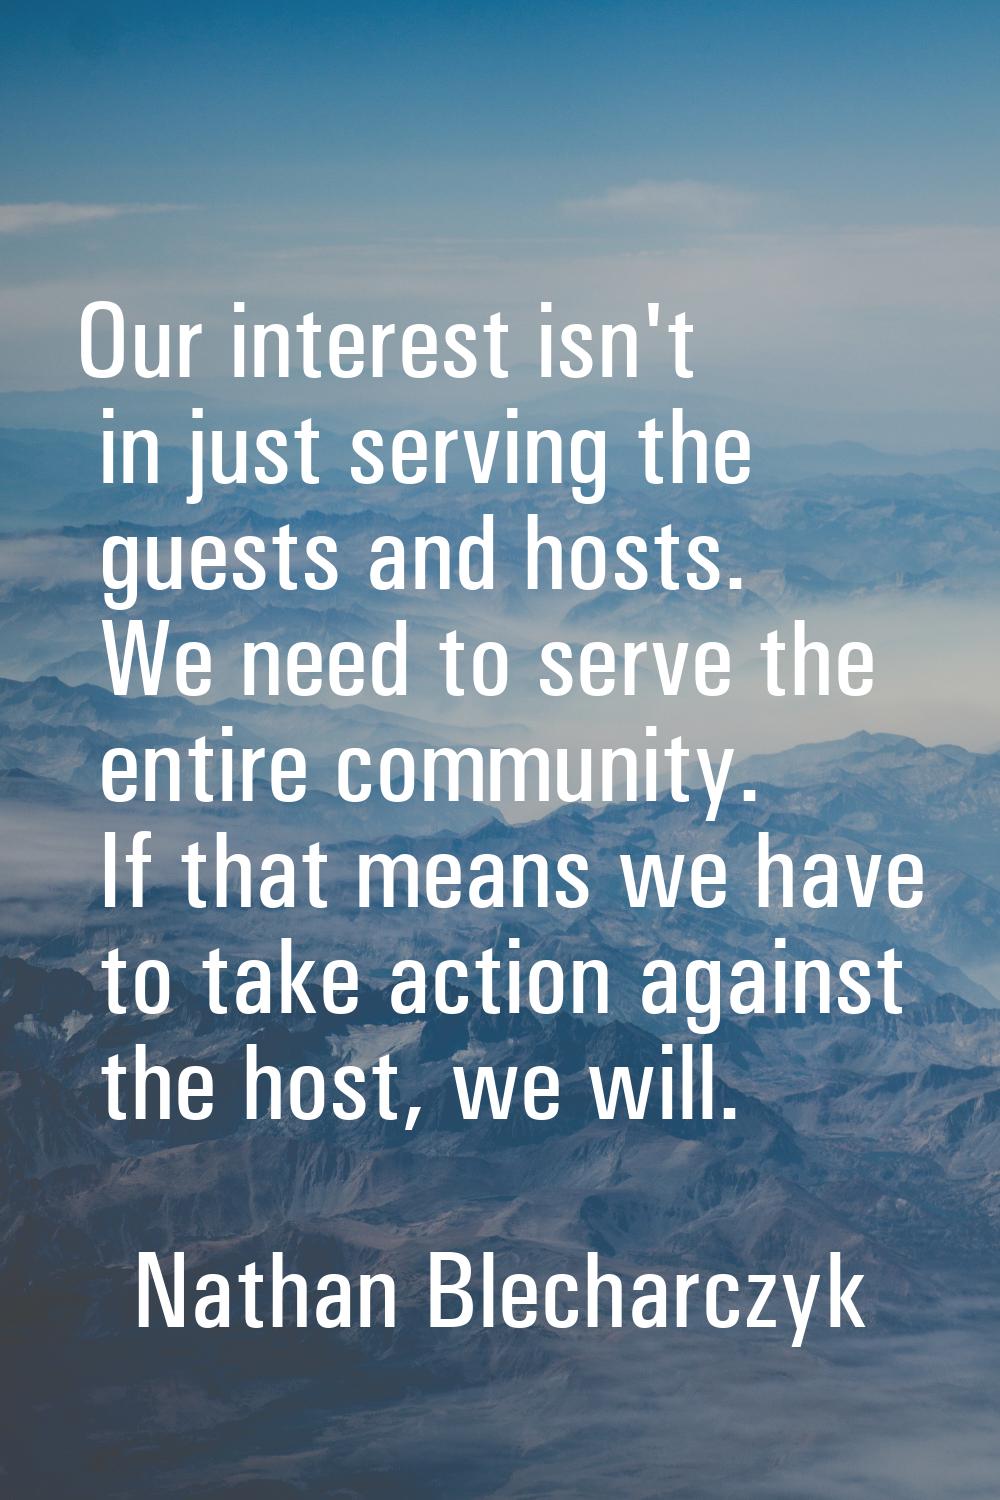 Our interest isn't in just serving the guests and hosts. We need to serve the entire community. If 